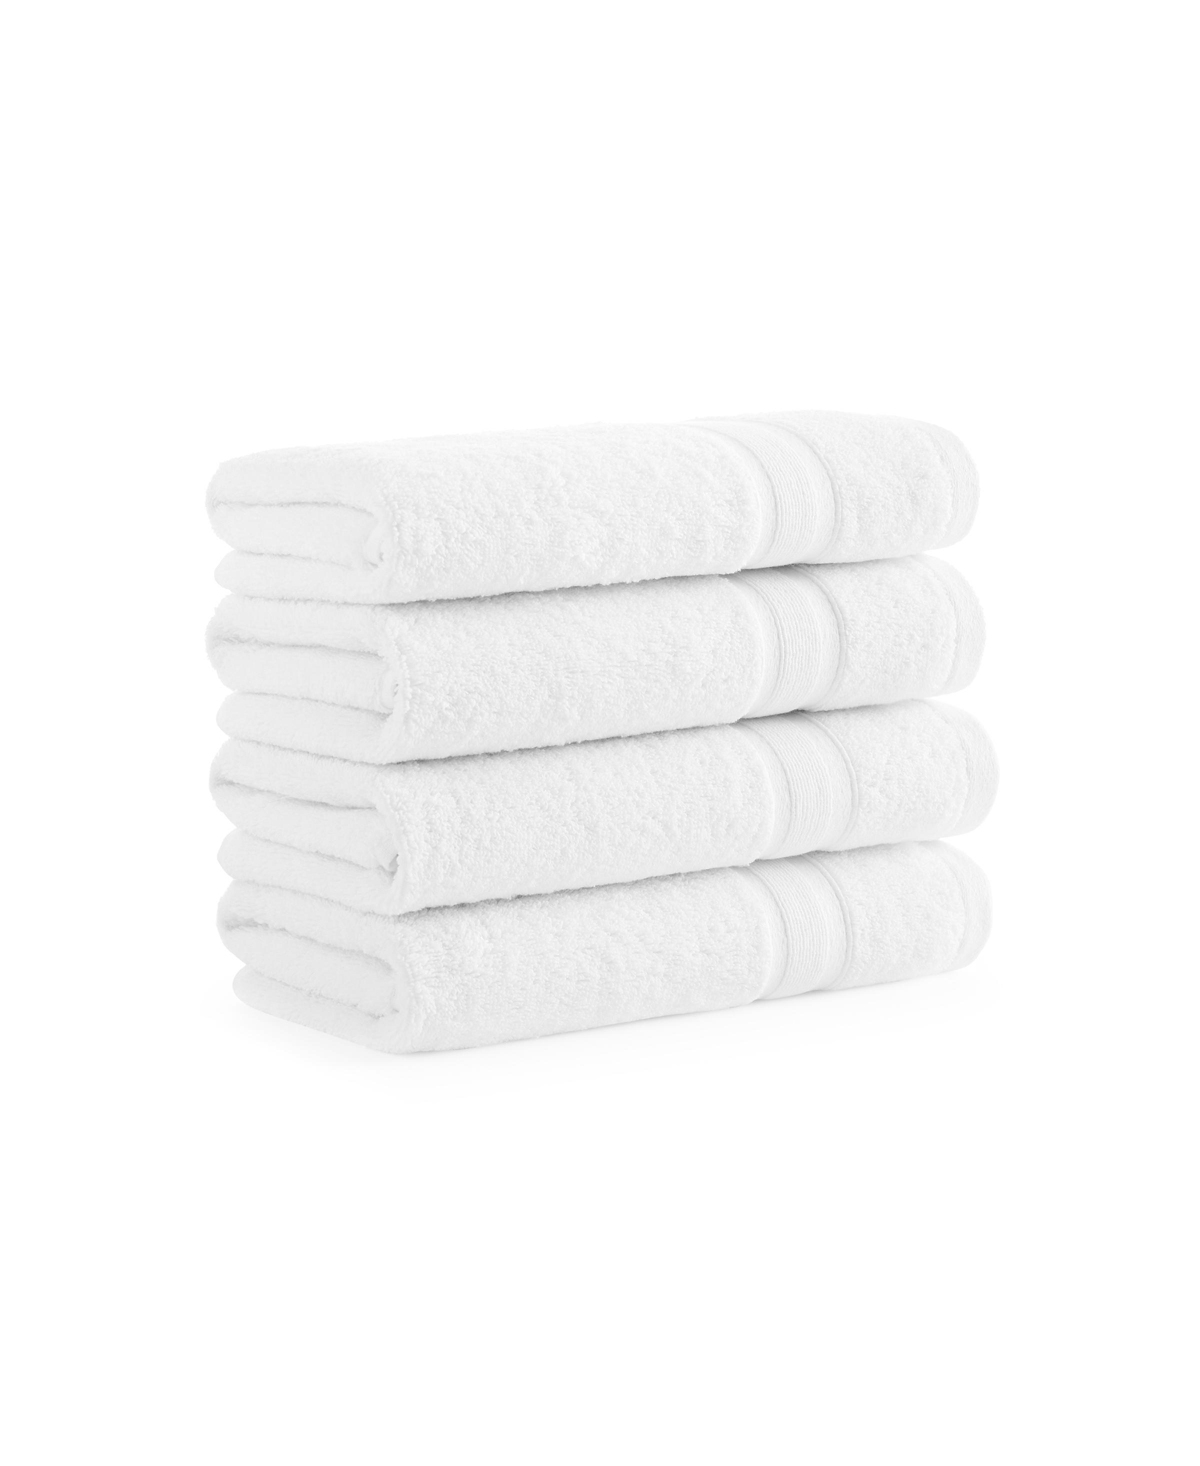 ASTON AND ARDEN AEGEAN ECO-FRIENDLY RECYCLED TURKISH HAND TOWELS (4 PACK), 18X30, 600 GSM, SOLID COLOR WITH WEFT WOV